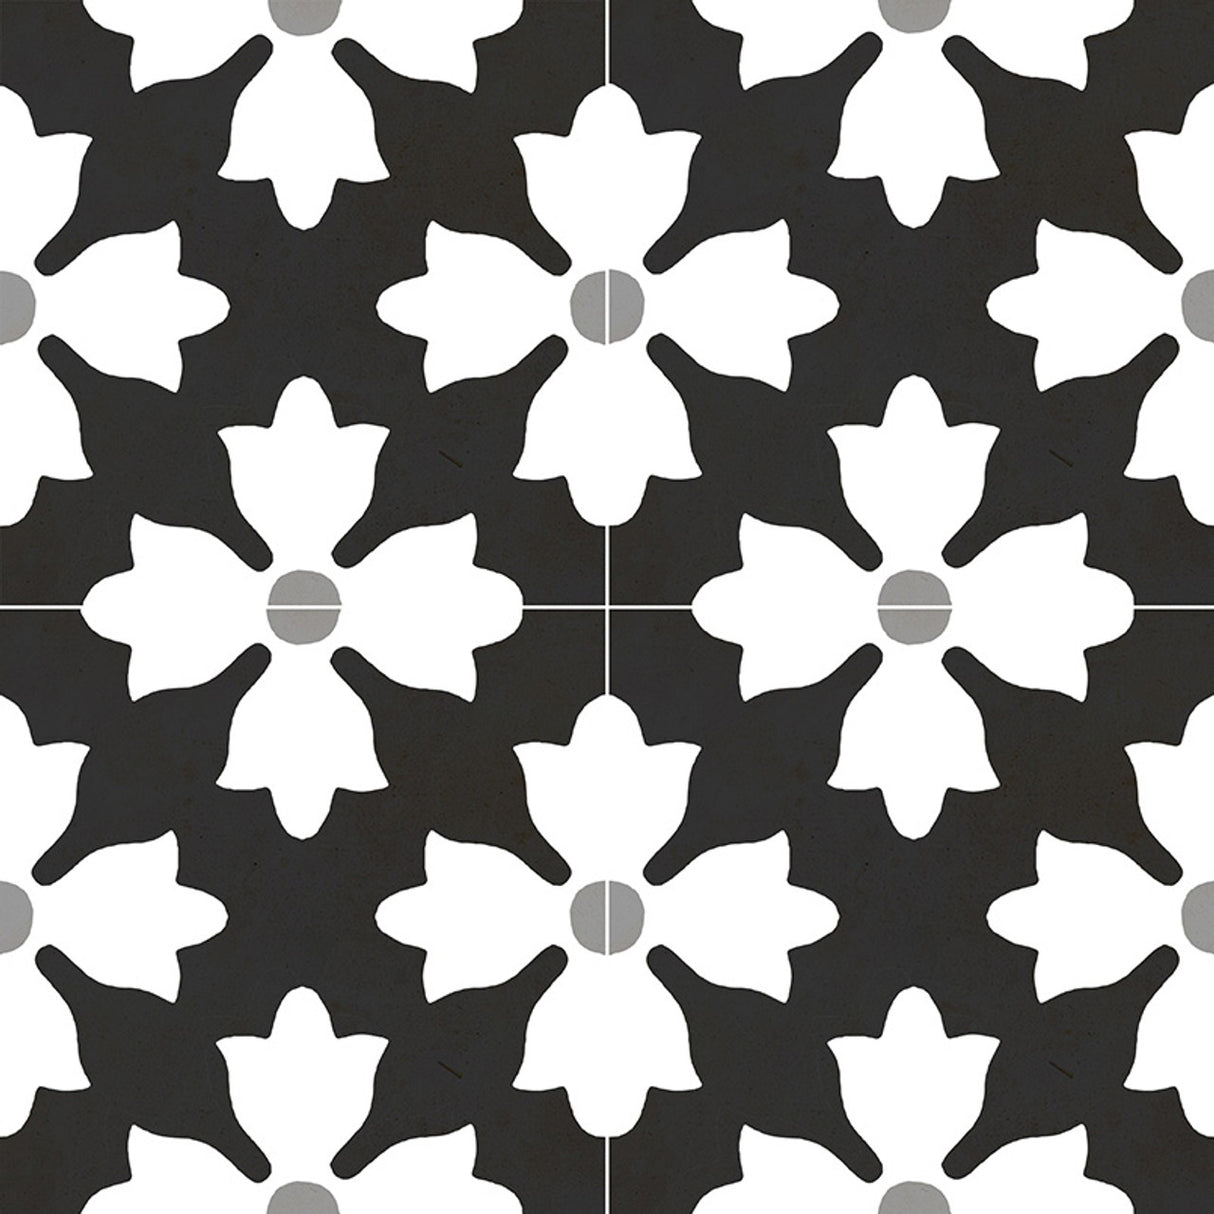 Kasbah 8"x8" Glazed Porcelain Floor and Wall Tile - MSI Collection KENZZI KASBAH 8X8 (Case)